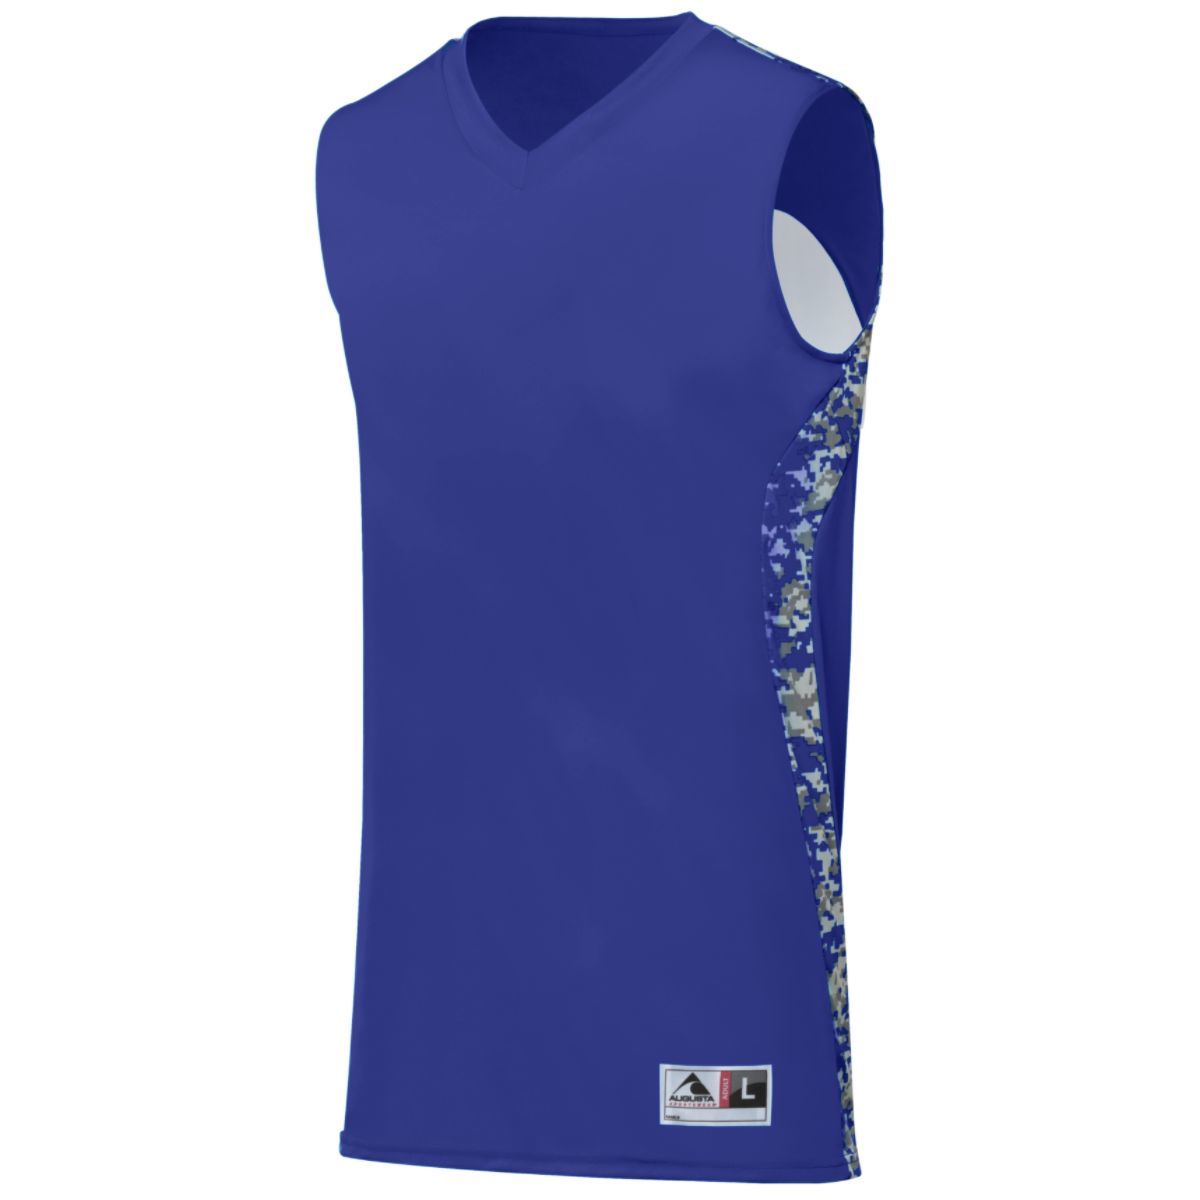 Augusta Sportswear Youth Hook Shot Reversible Jersey in Purple/Purple Digi  -Part of the Youth, Youth-Jersey, Augusta-Products, Basketball, Shirts, All-Sports, All-Sports-1 product lines at KanaleyCreations.com